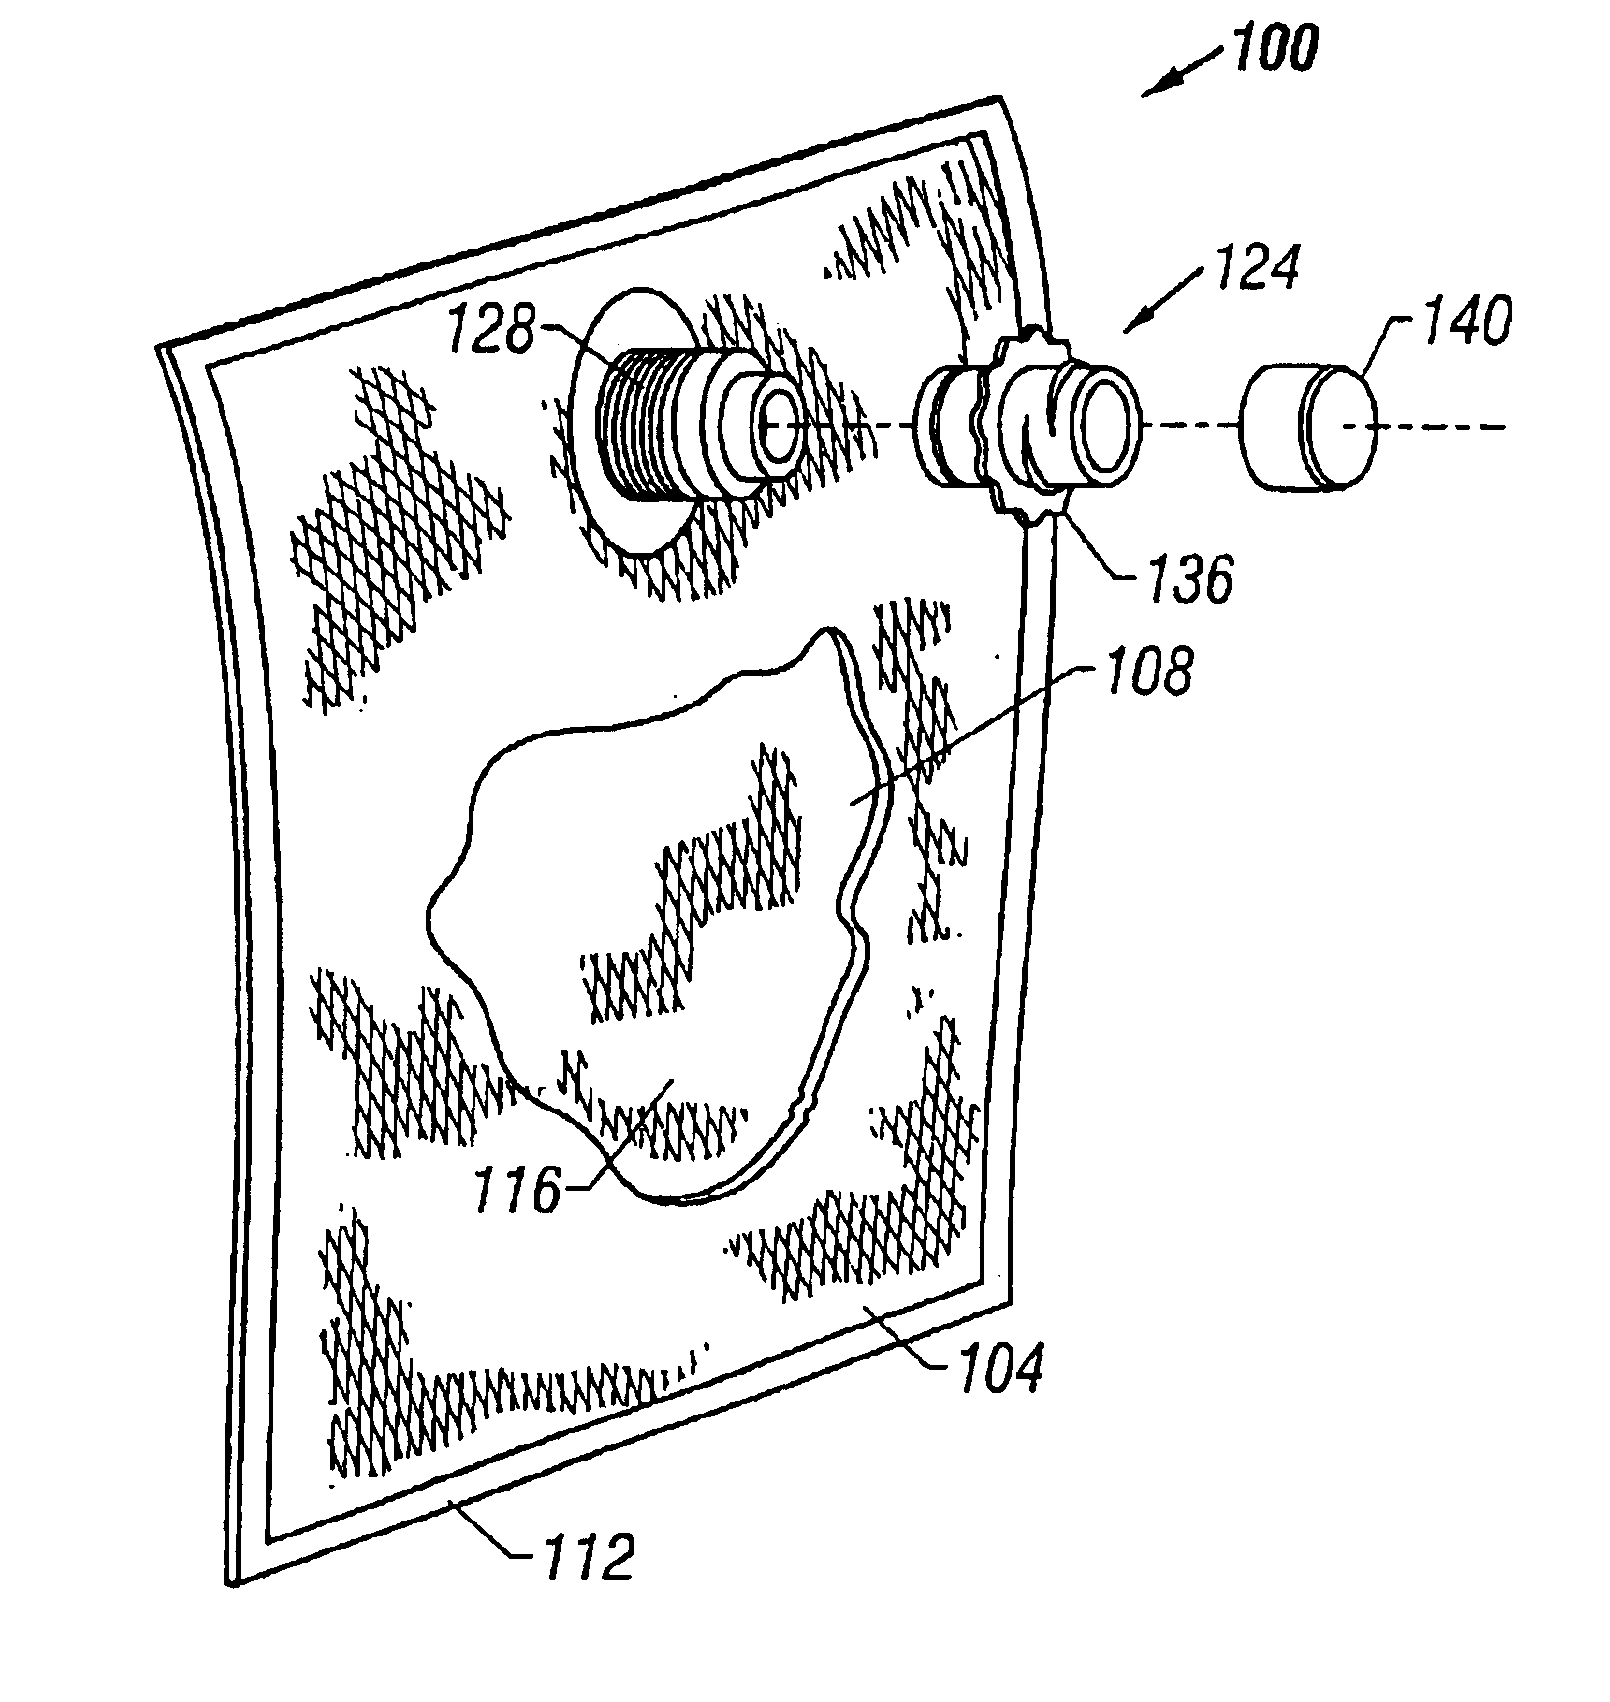 Collapsible bag for dispensing liquids and method